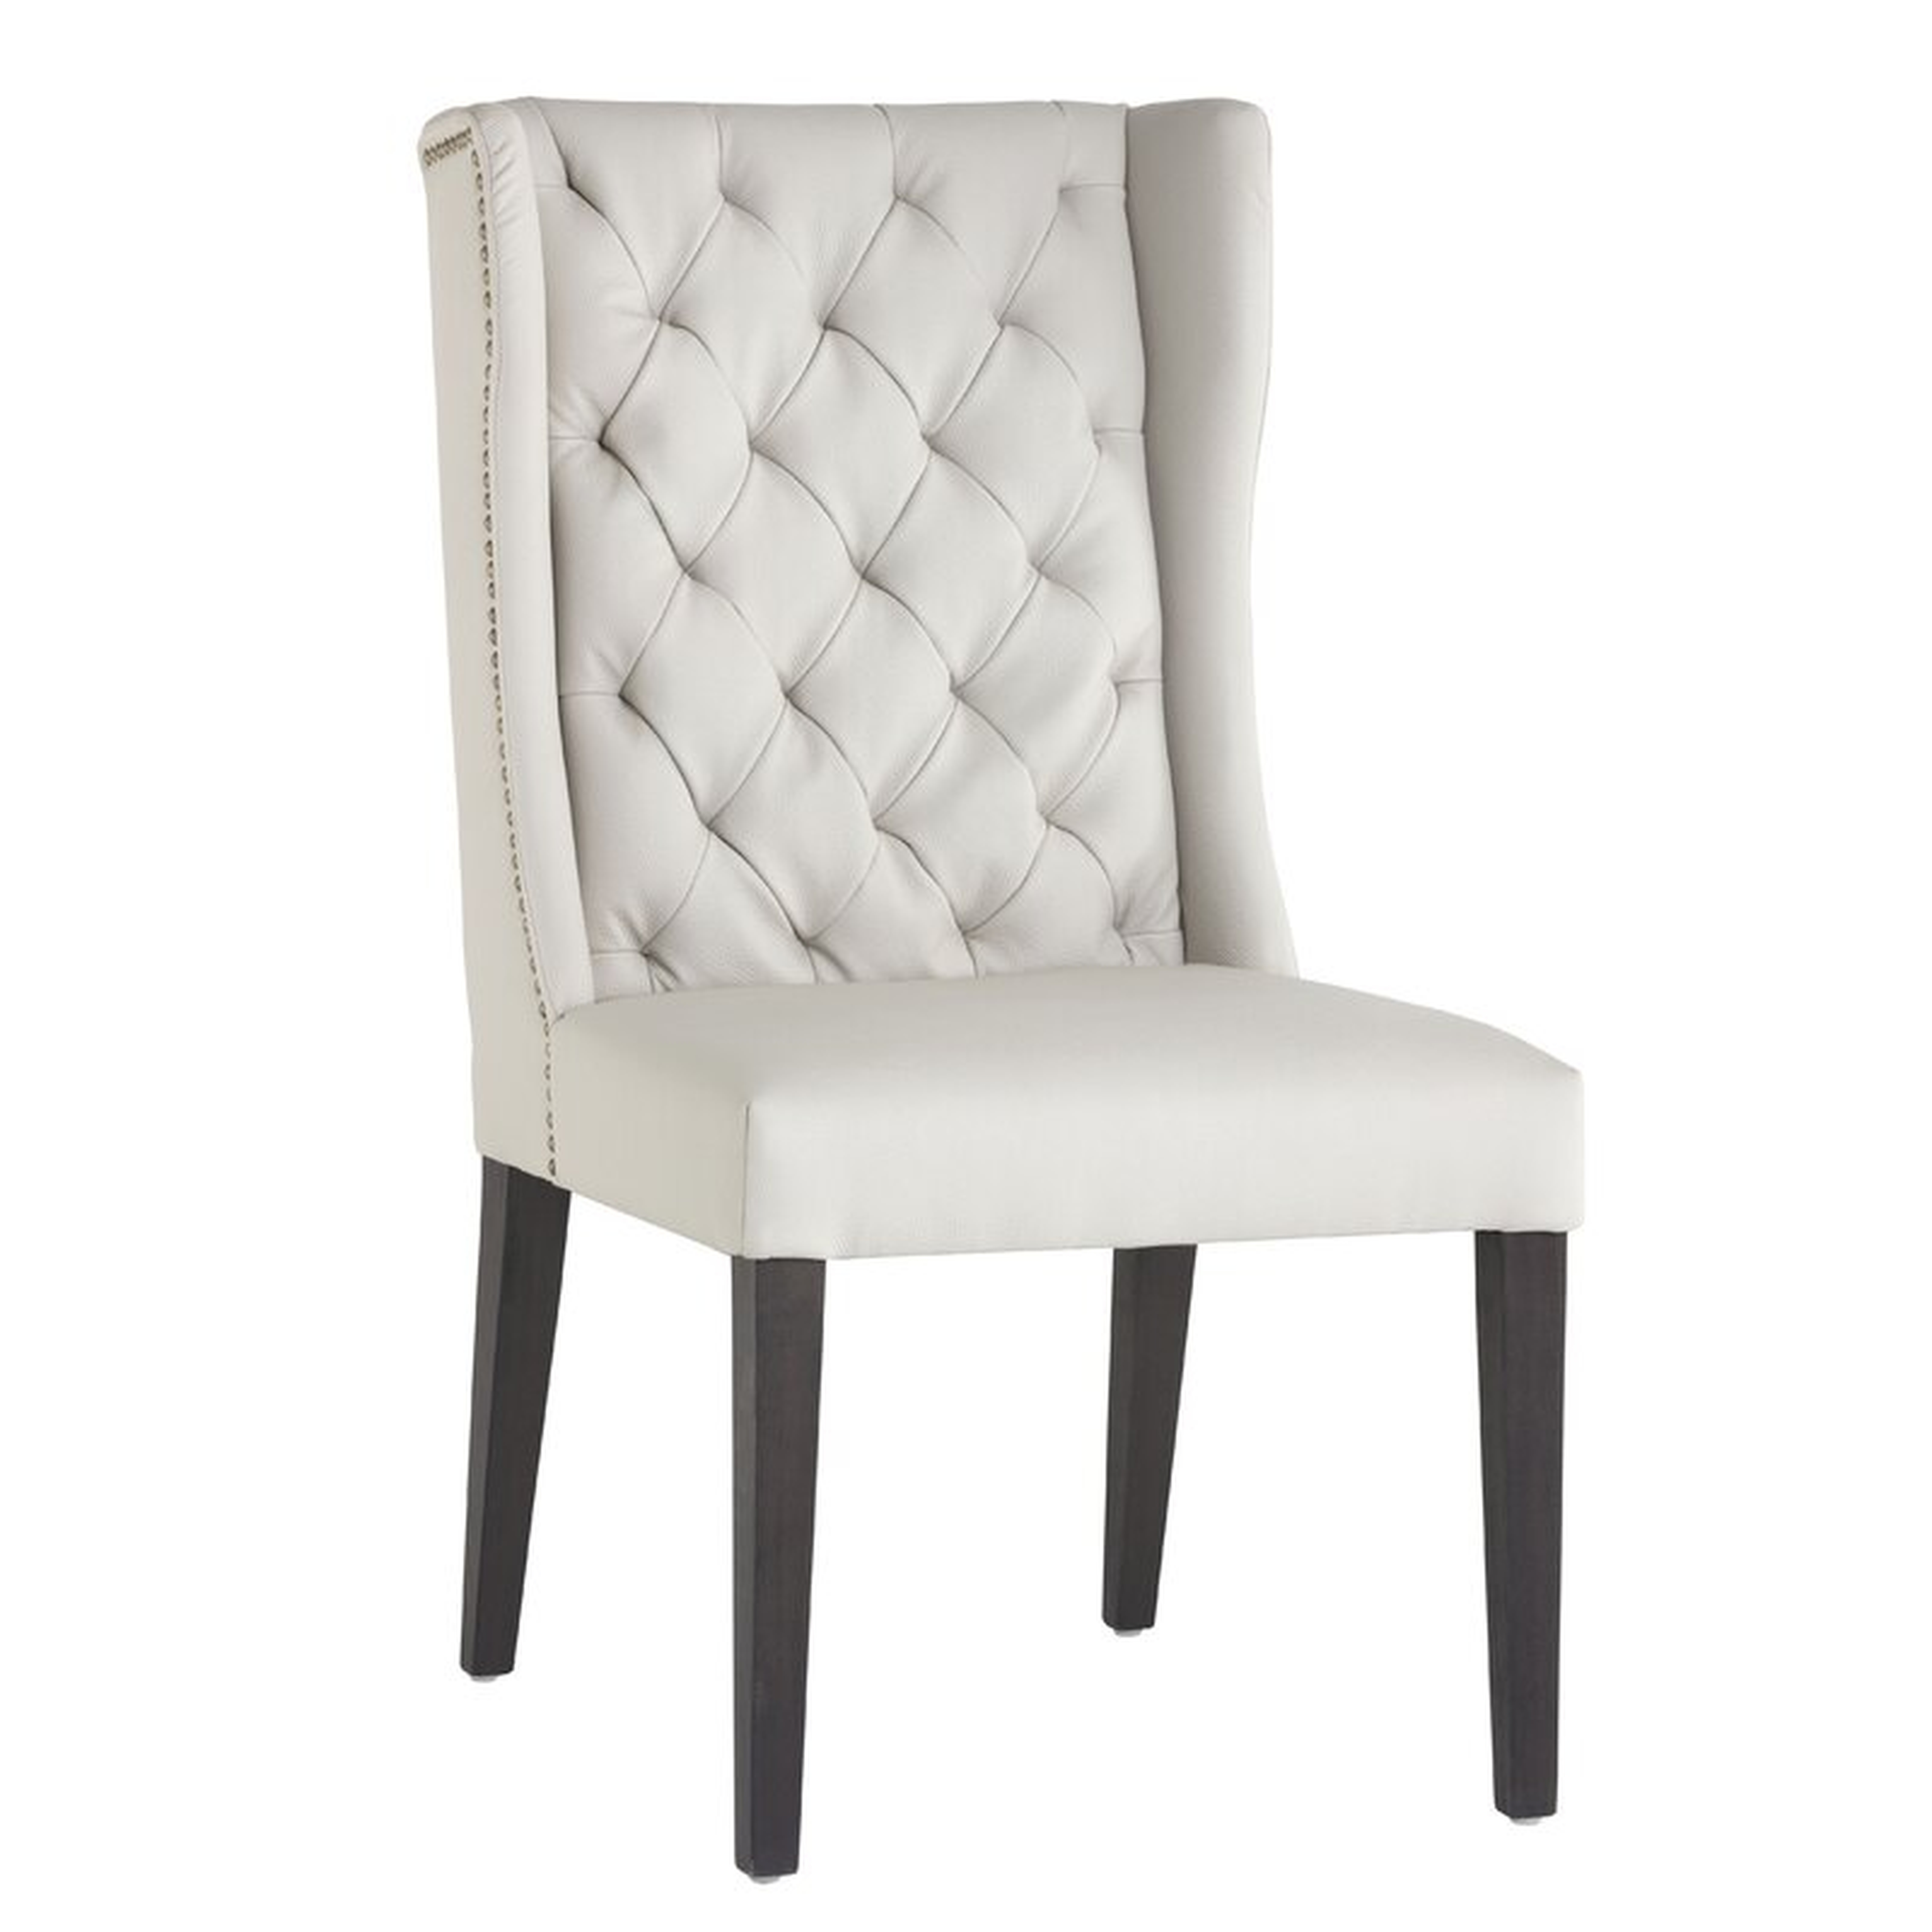 Sunpan Modern St.Clair Upholstered Dining Chair, Set of 2 - Perigold